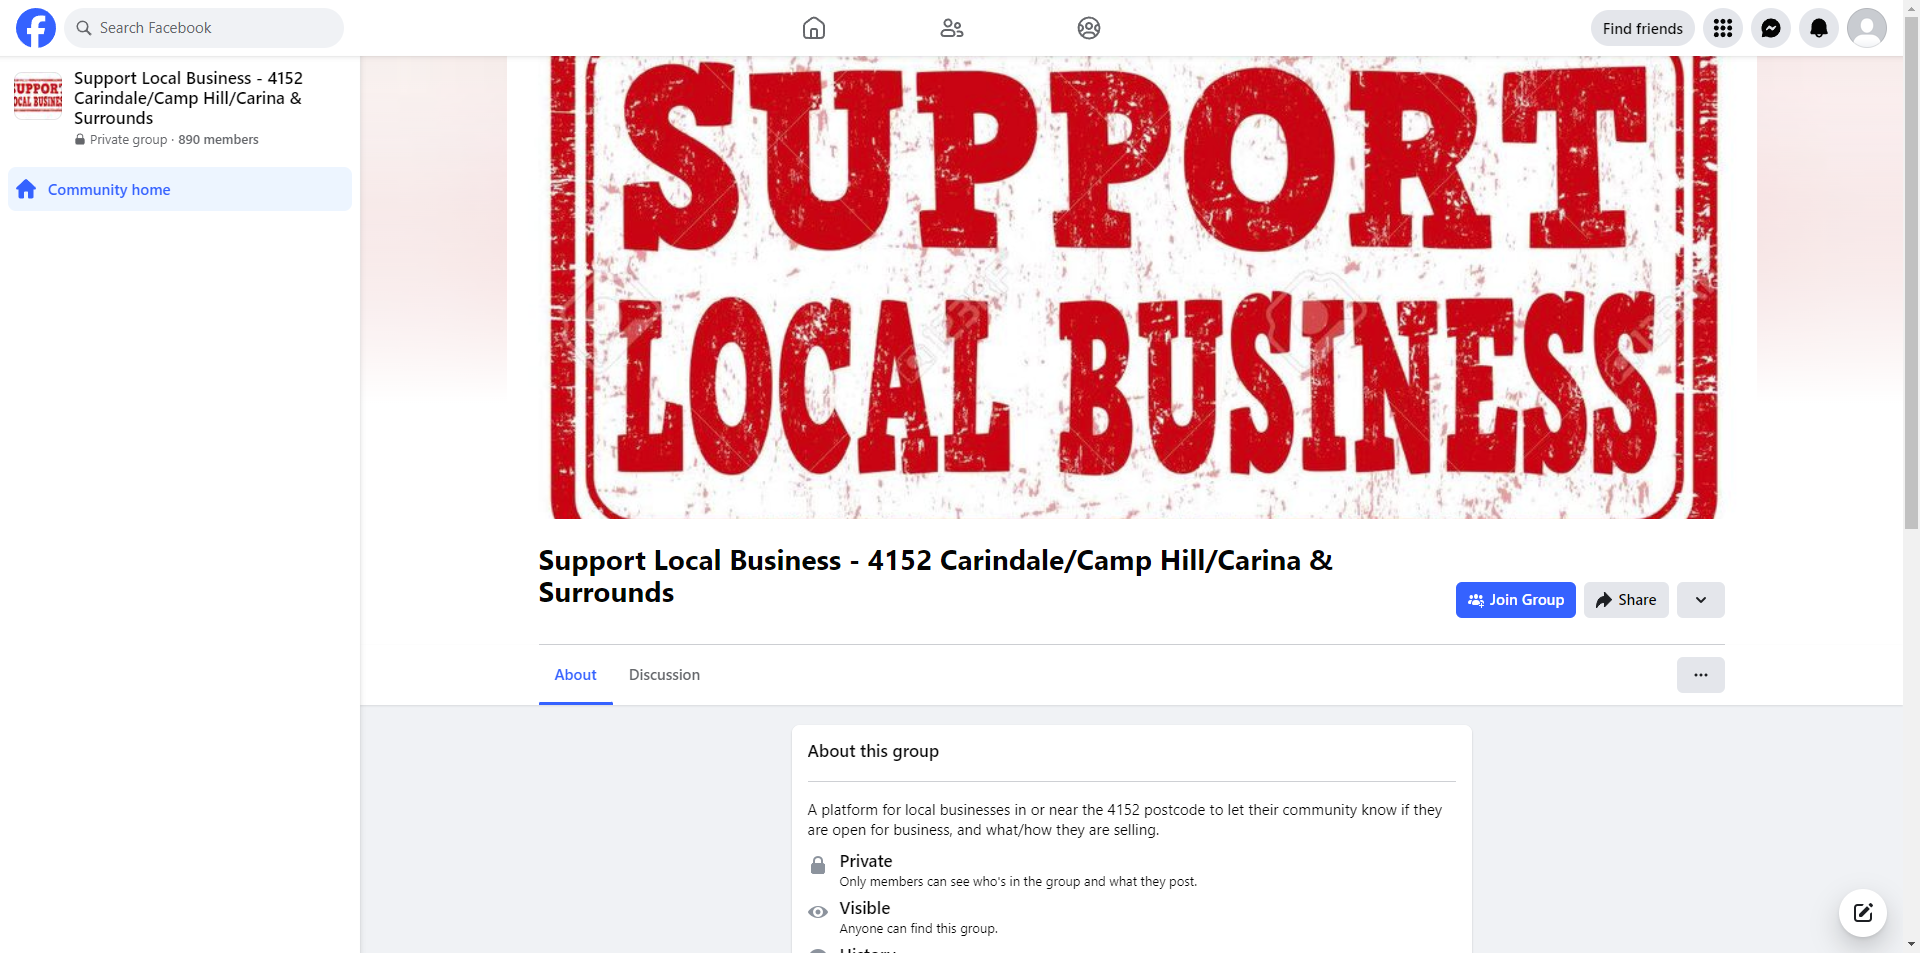 Support Local Business - 4152 Carindale/Camp Hill/Carina & Surrounds